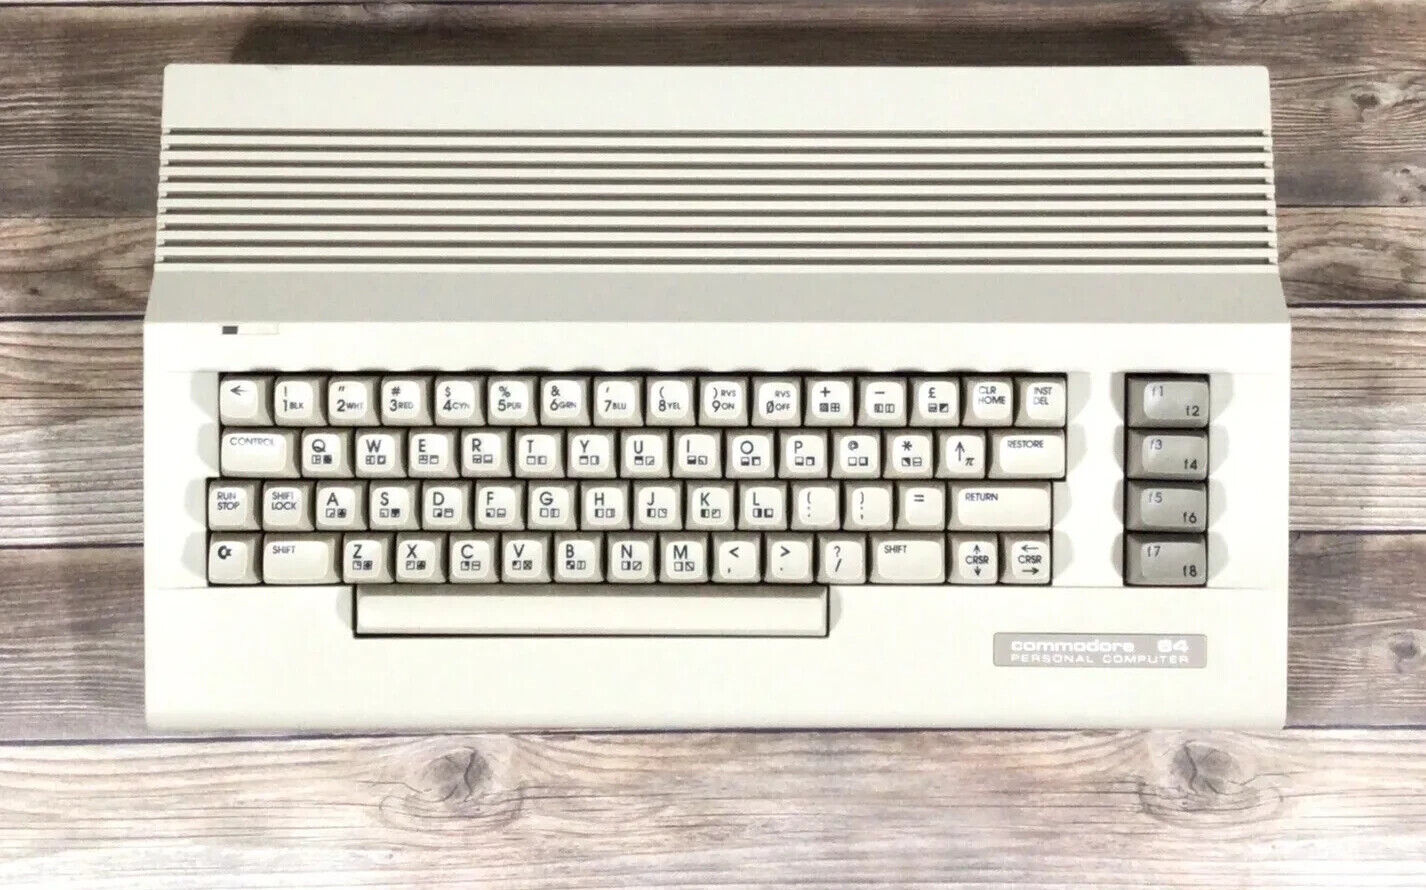 Commodore 64c Computer - Working and in great condition